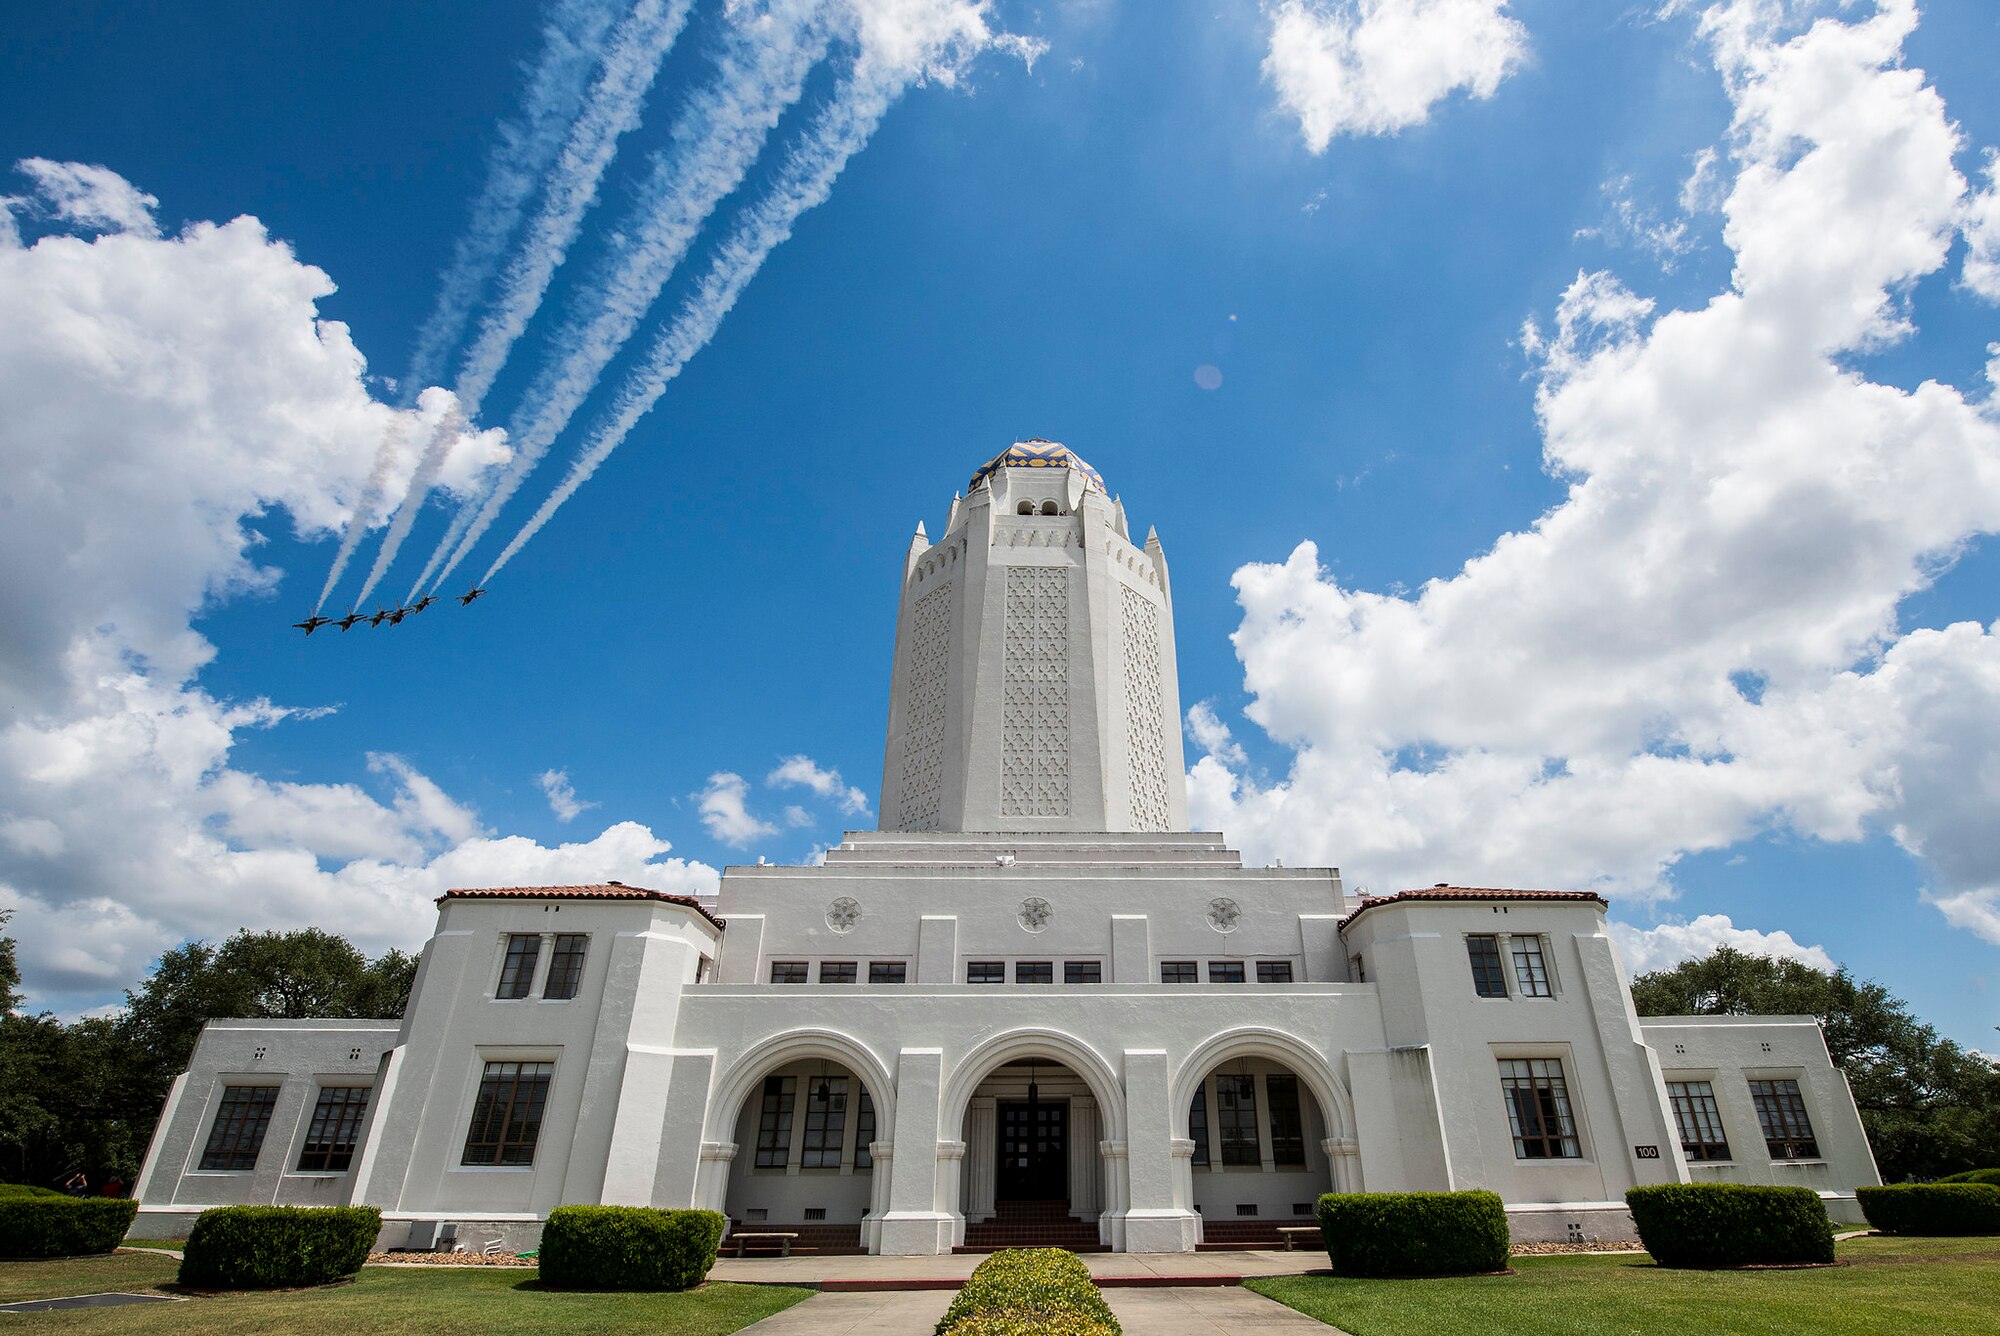 The United States Air Force Air Demonstration Squadron “Thunderbirds” fly over the Taj Mahal at Joint Base San Antonio-Randolph during their America Strong salute May 13.